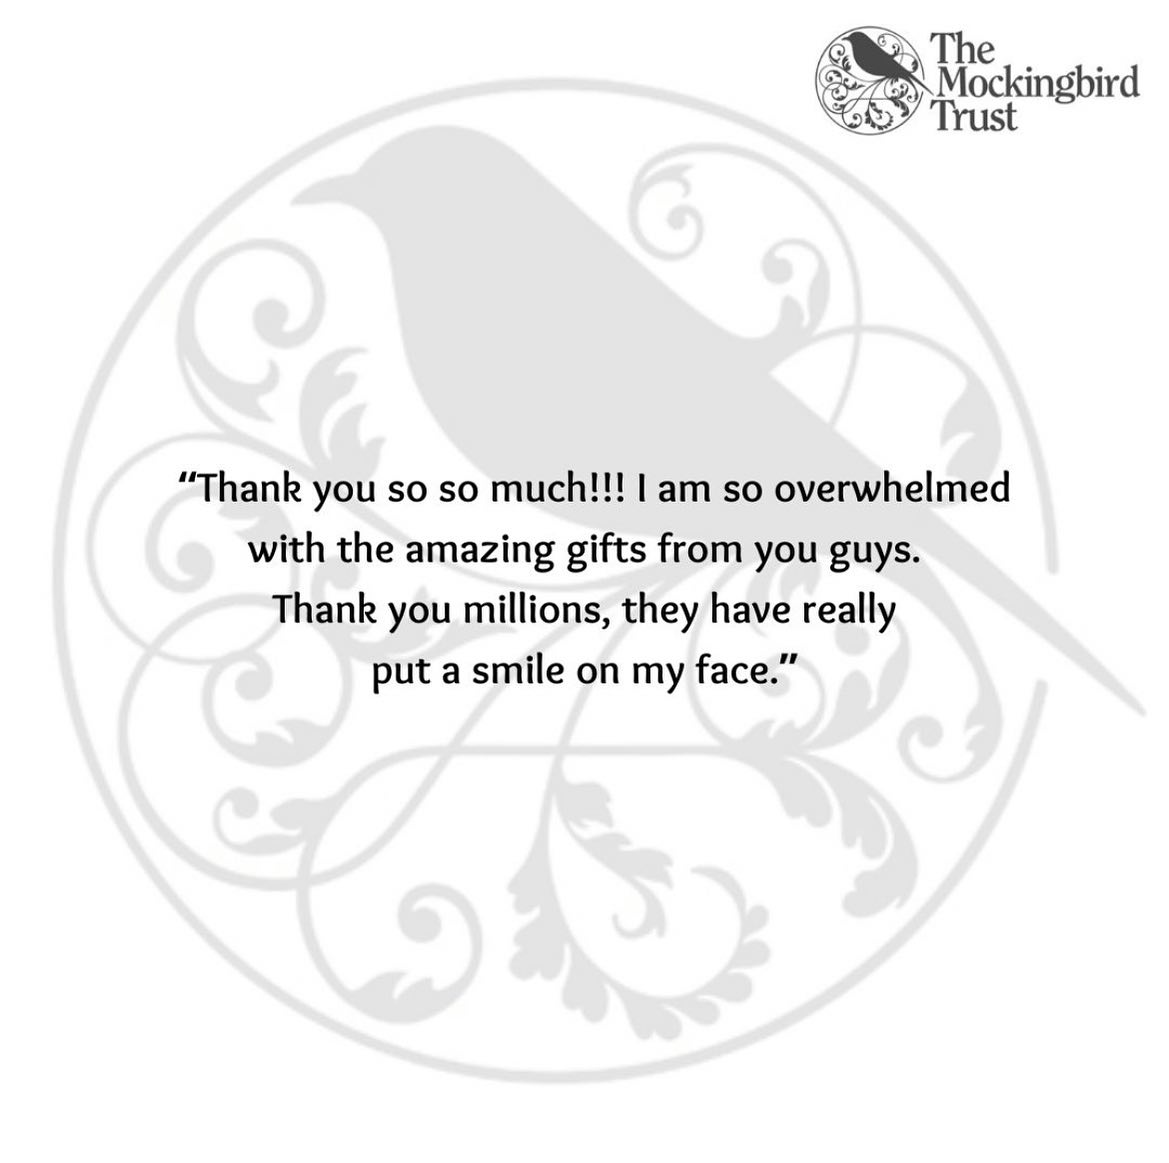 Such wonderful feedback from a lovely client who was sent a big box of goodies by TMBT!

#themockingbirdtrust #TMBT #charity #experience